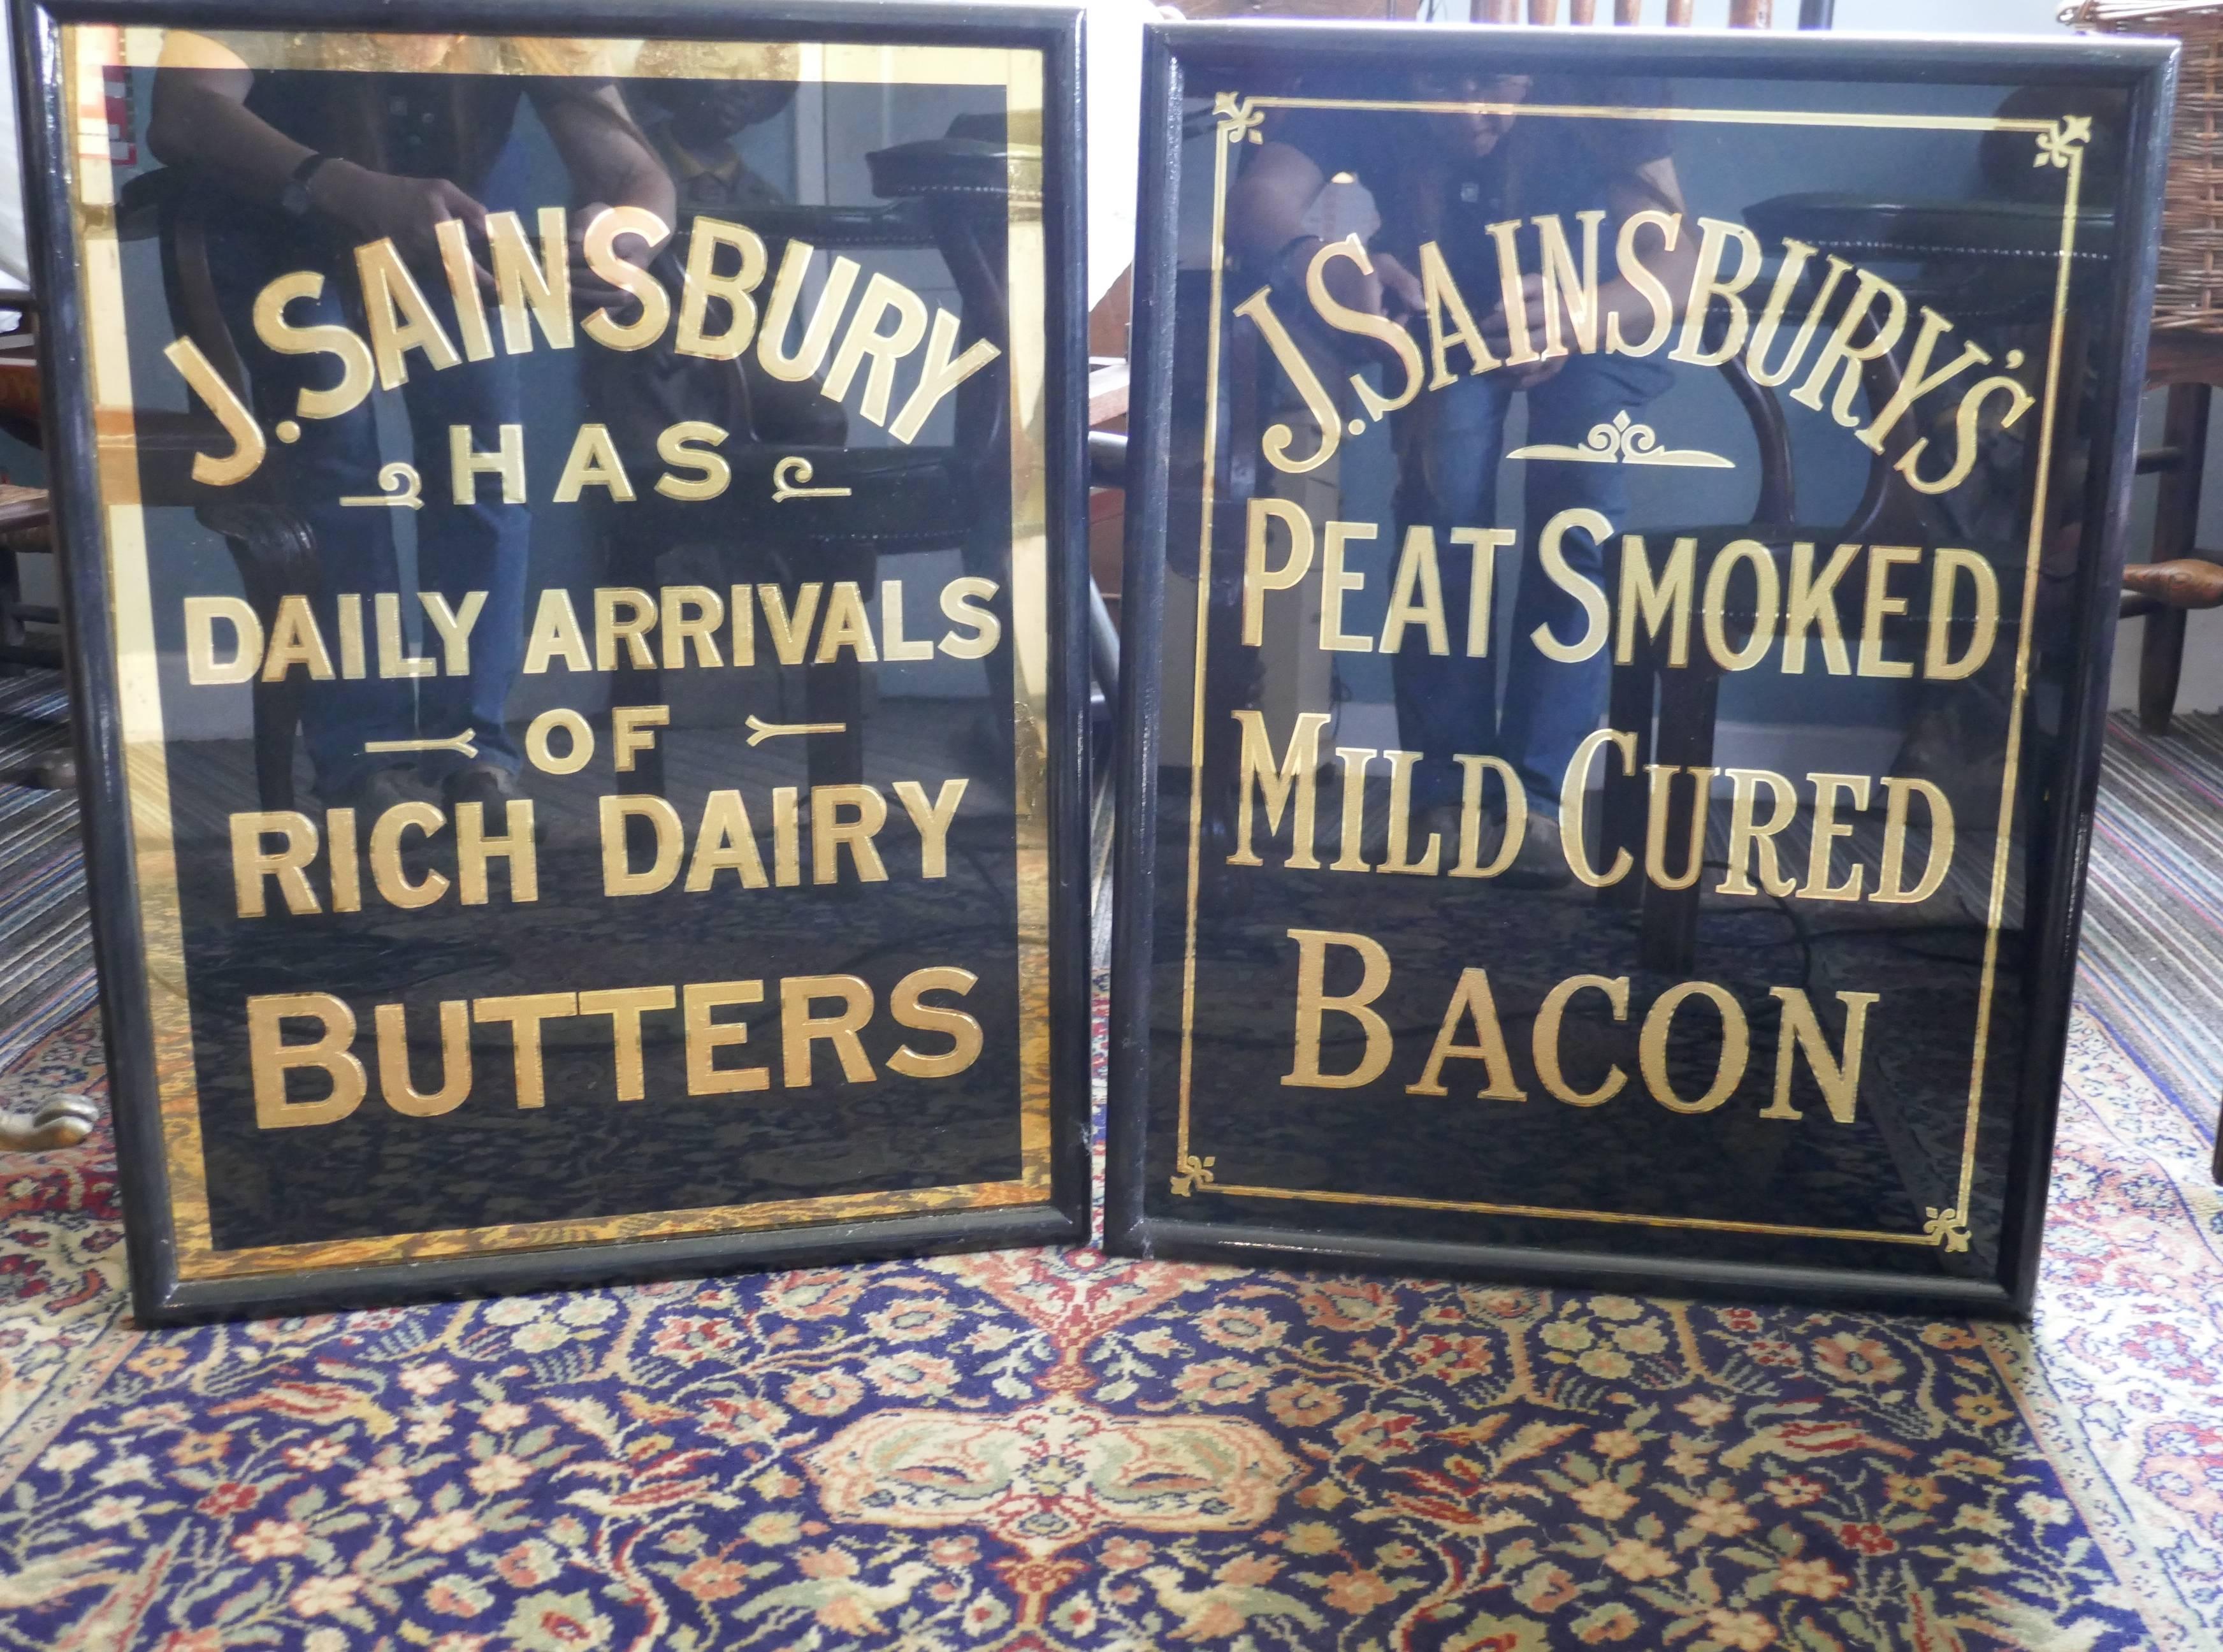 Folk Art Art Deco J.S.Sainsbury’s Butter Advertising Mirror Sign, in Black and Gold